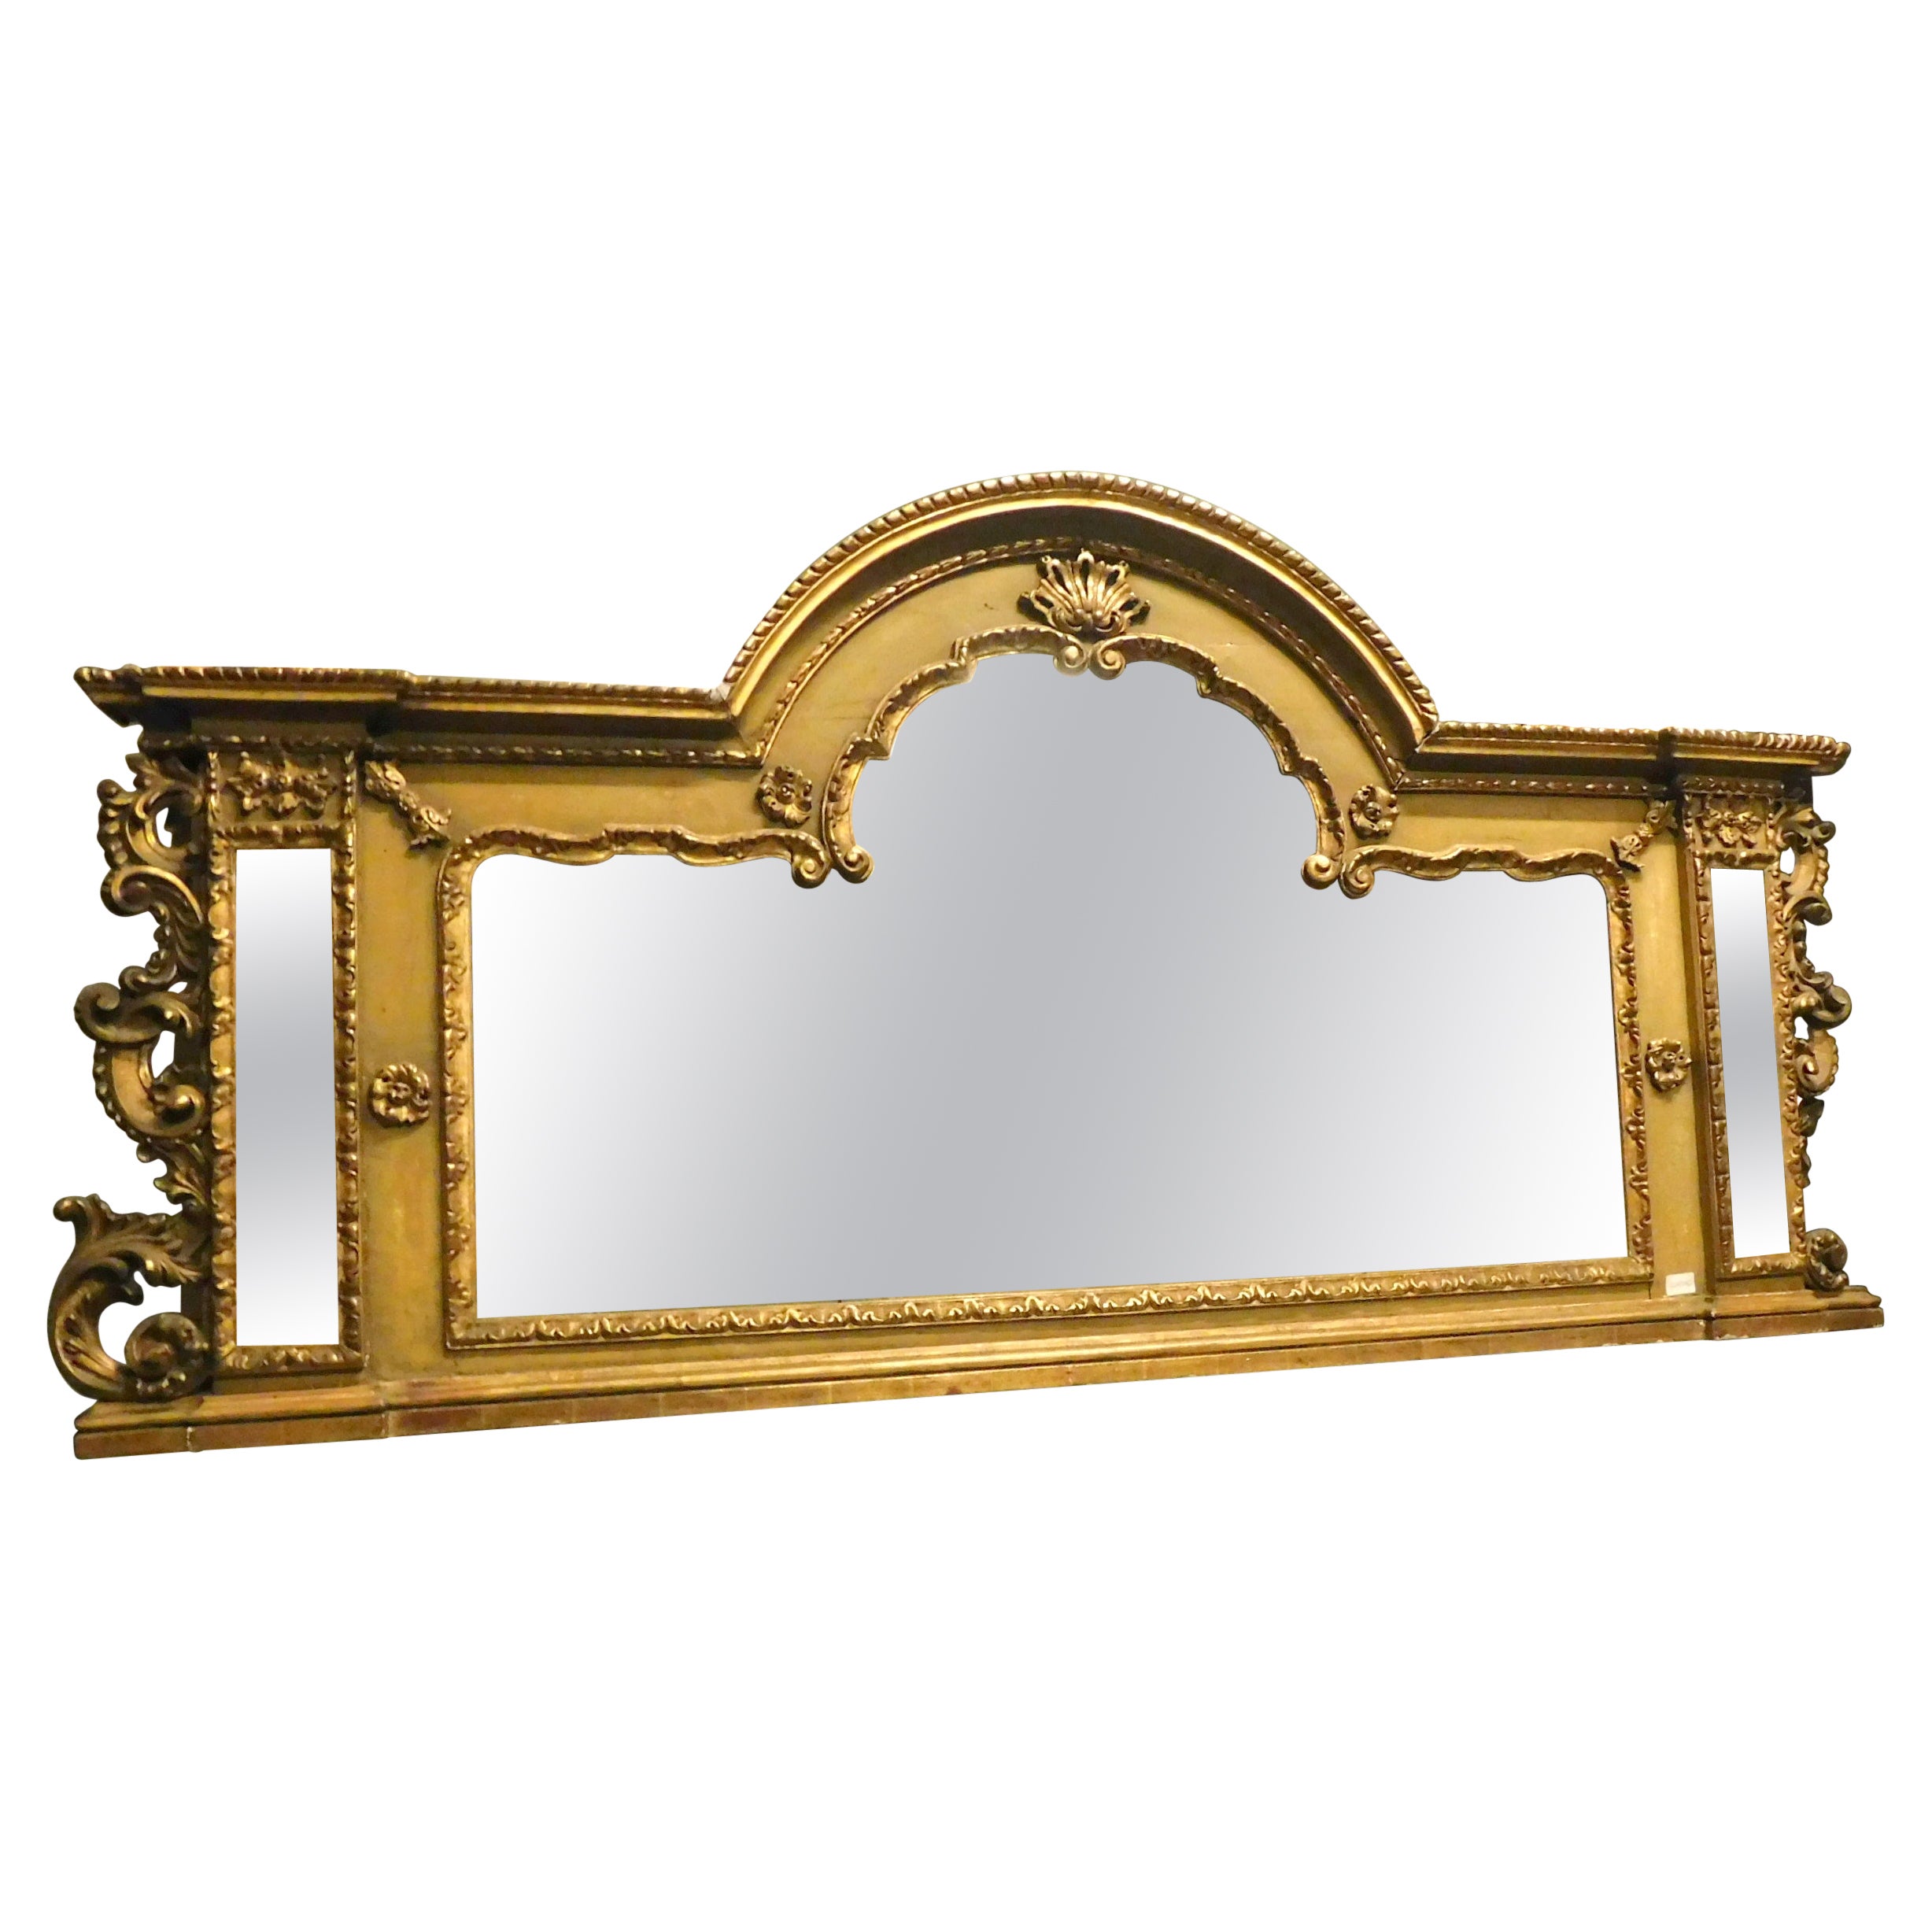 Antique Rectangular Lacquered Gilded Mirror, Carved with Flowers, '900 Italy For Sale